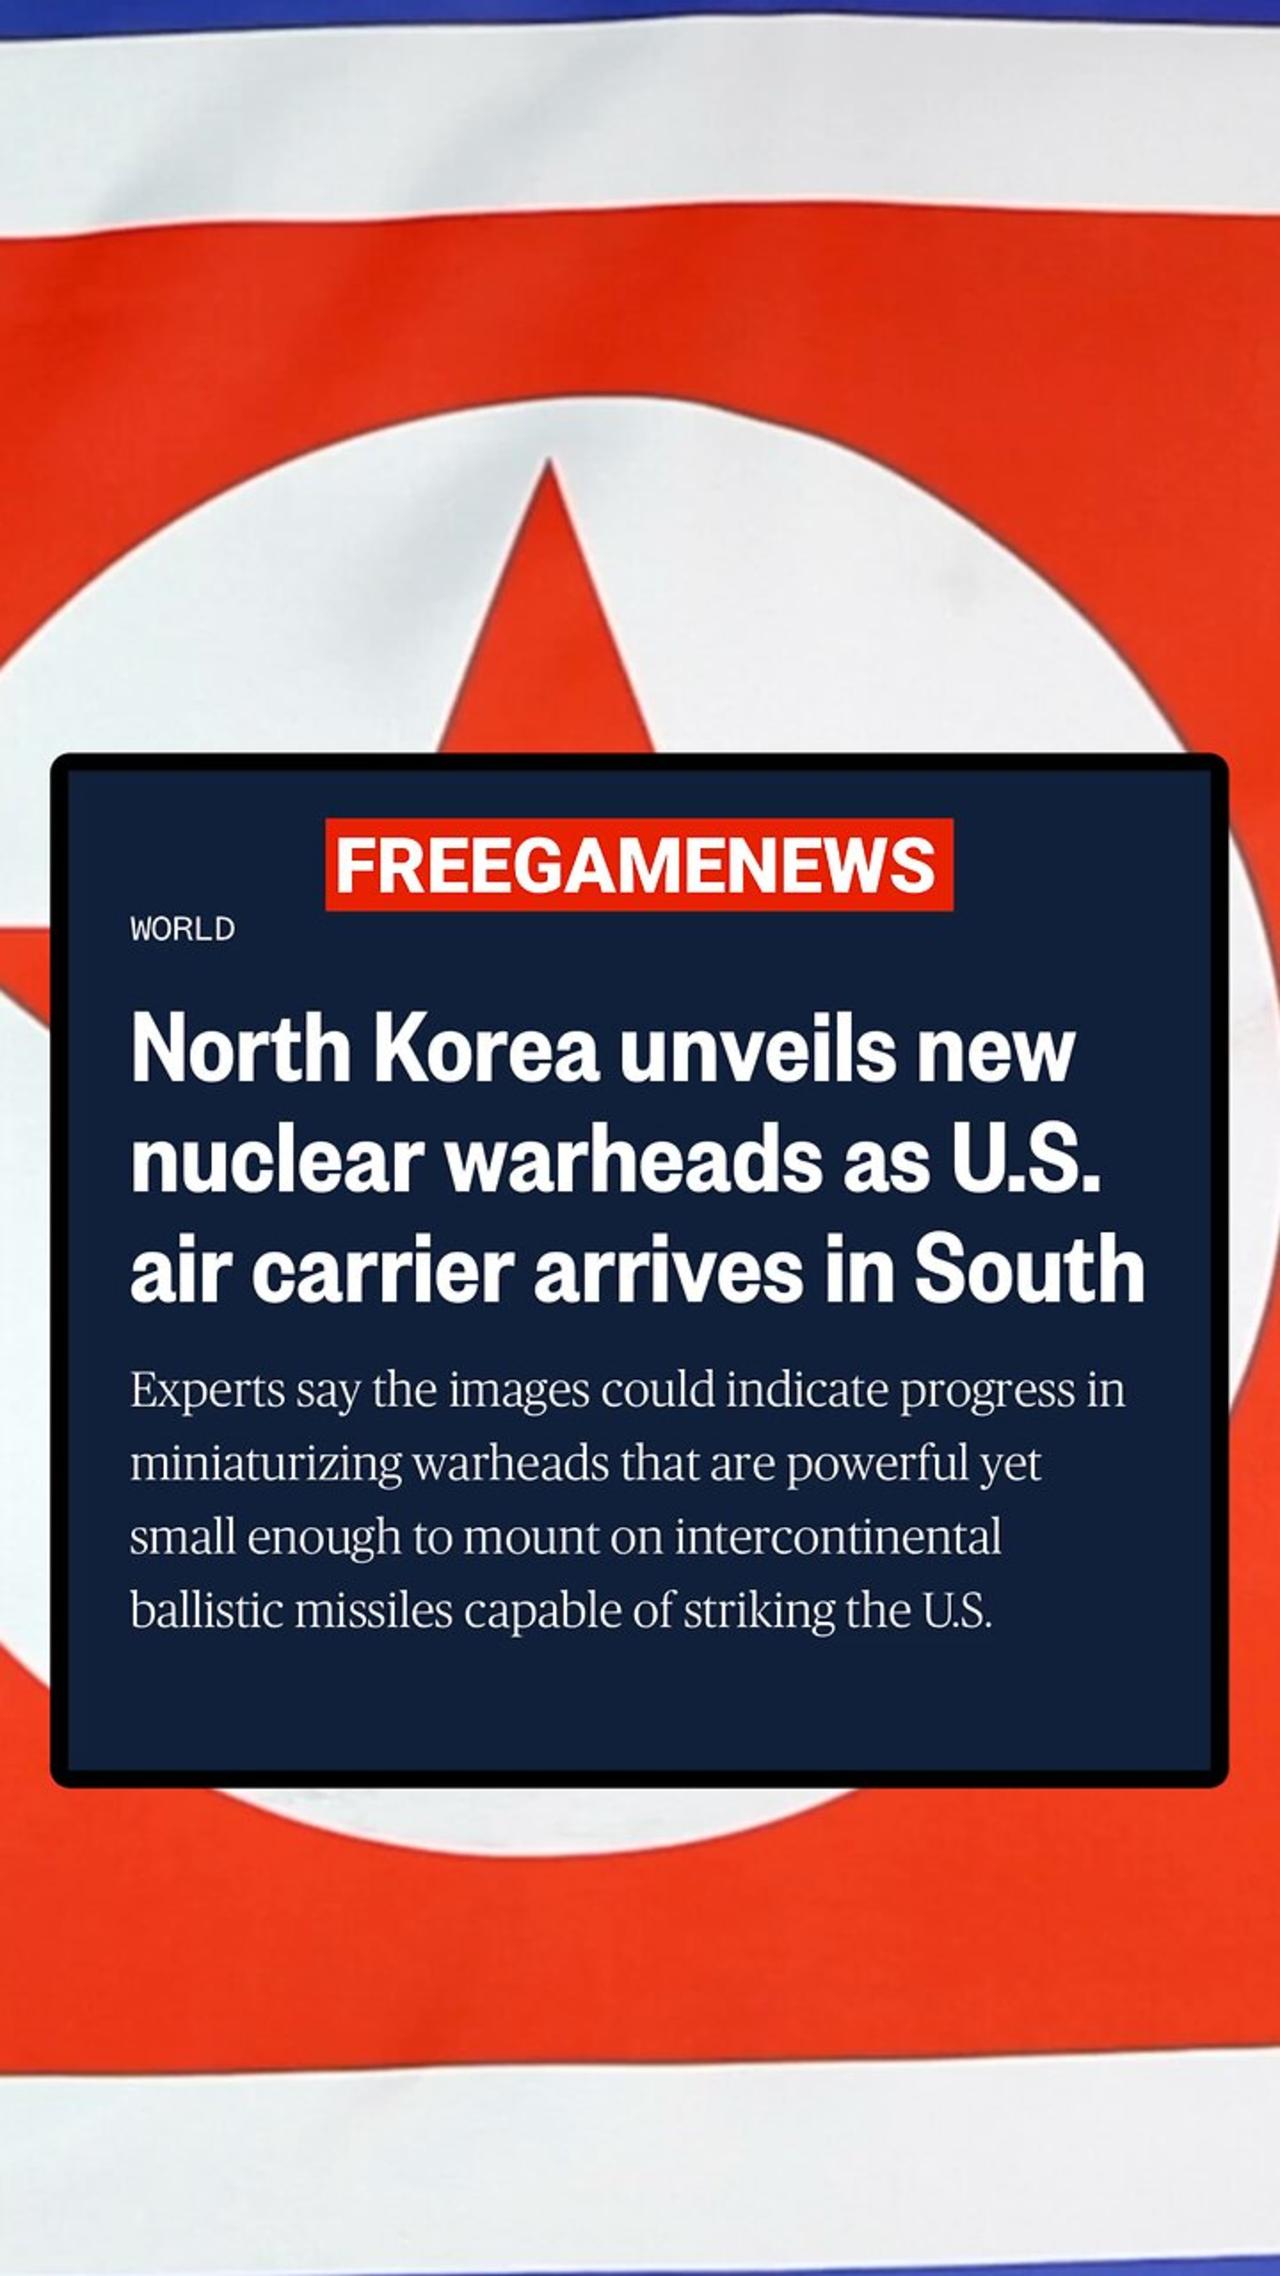 North Korea unveils new nuclear warheads as U.S. air carrier arrives in South